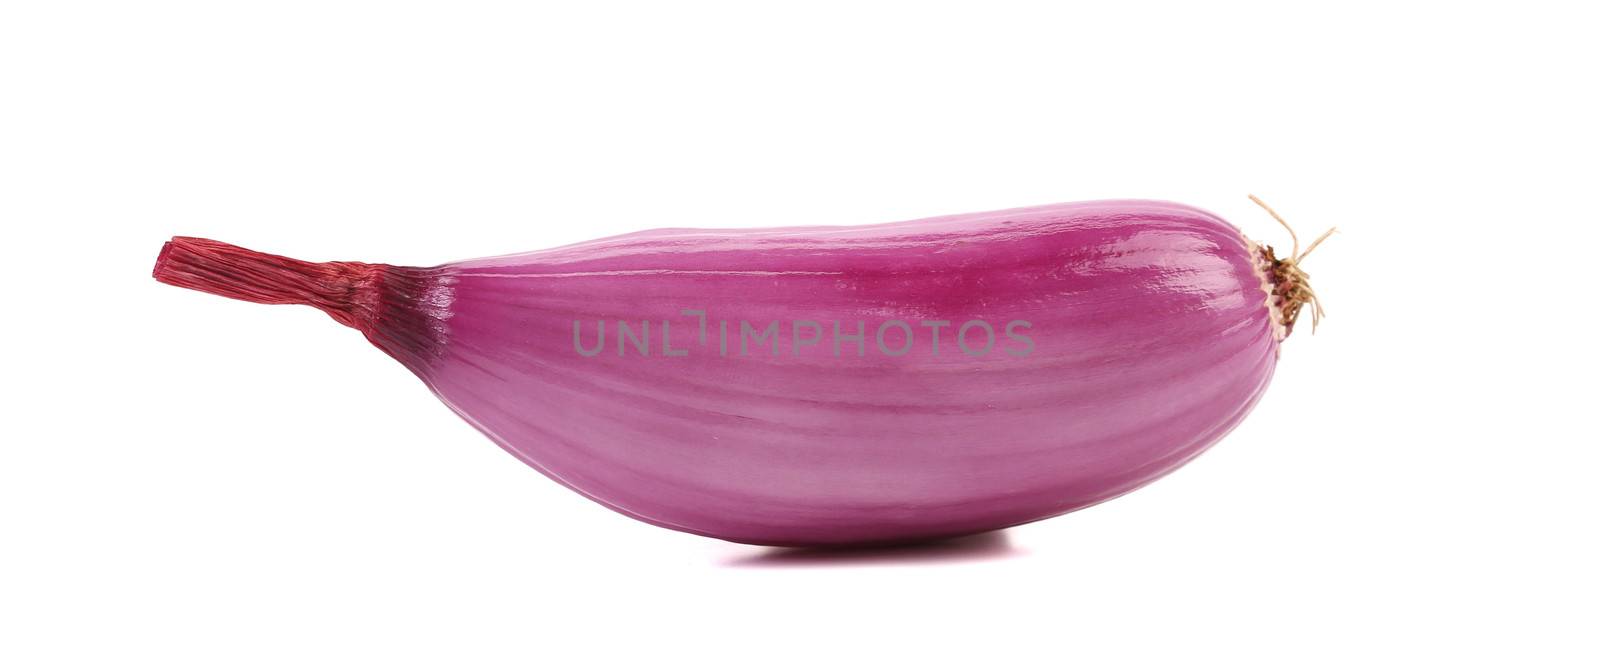 Organic red onion. Slice. Isolated on a white background.